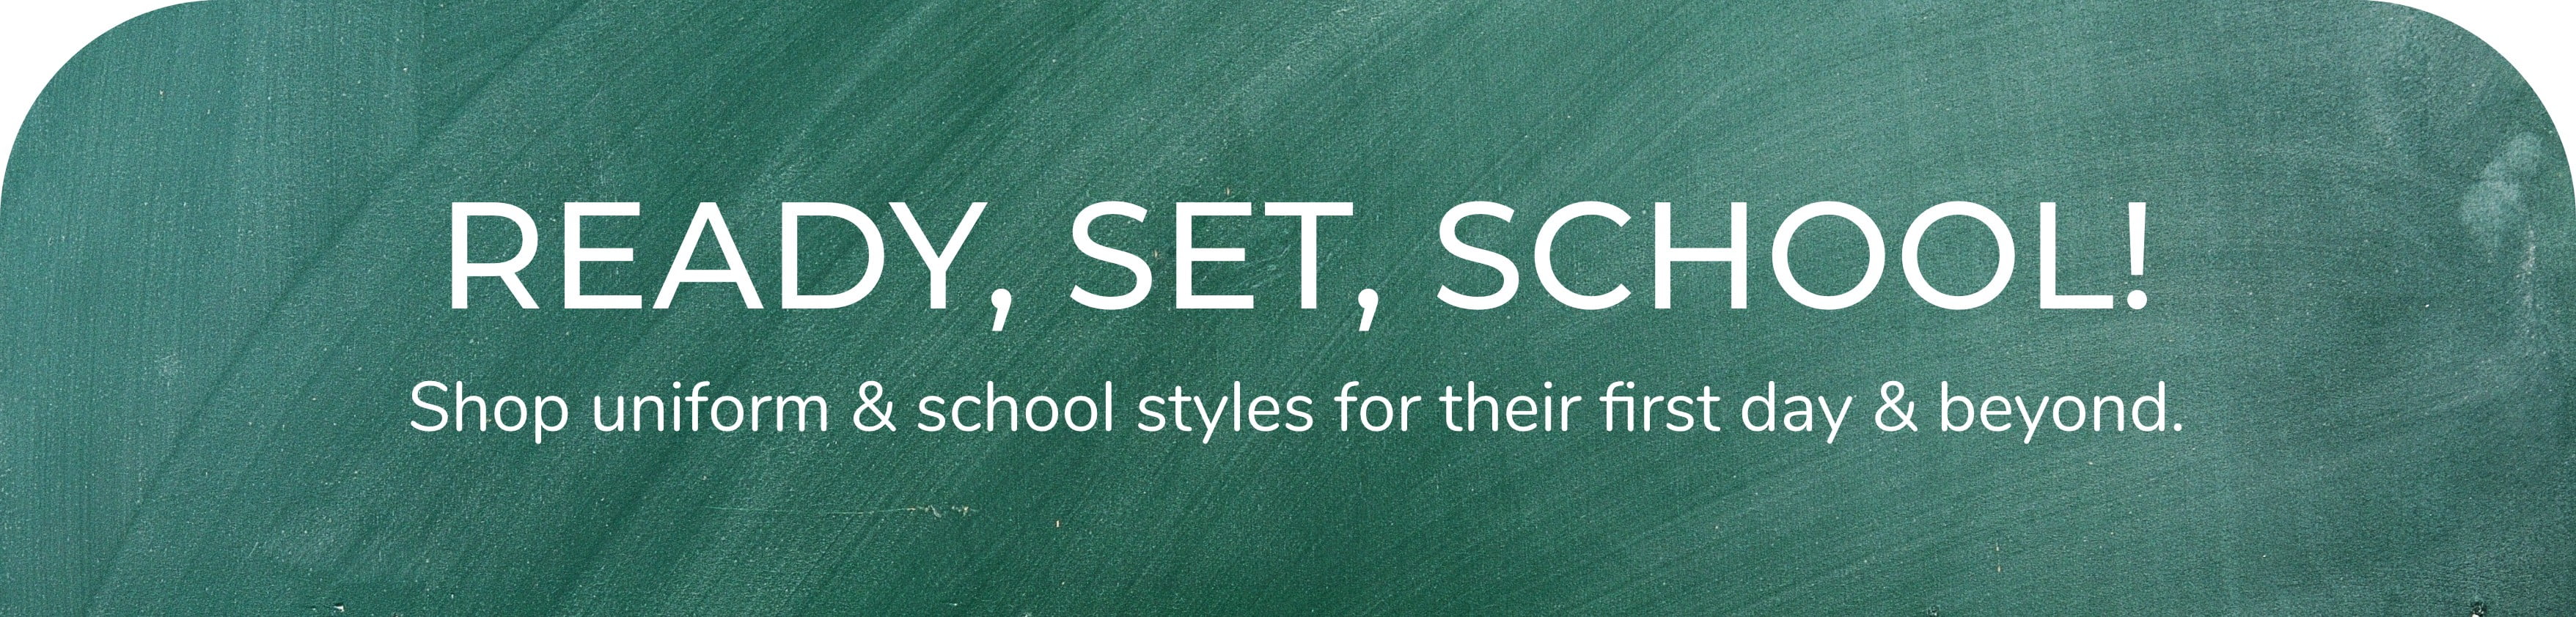 BACK TO SCHOOL: Shop uniform & school styles for
                their first day & beyond!